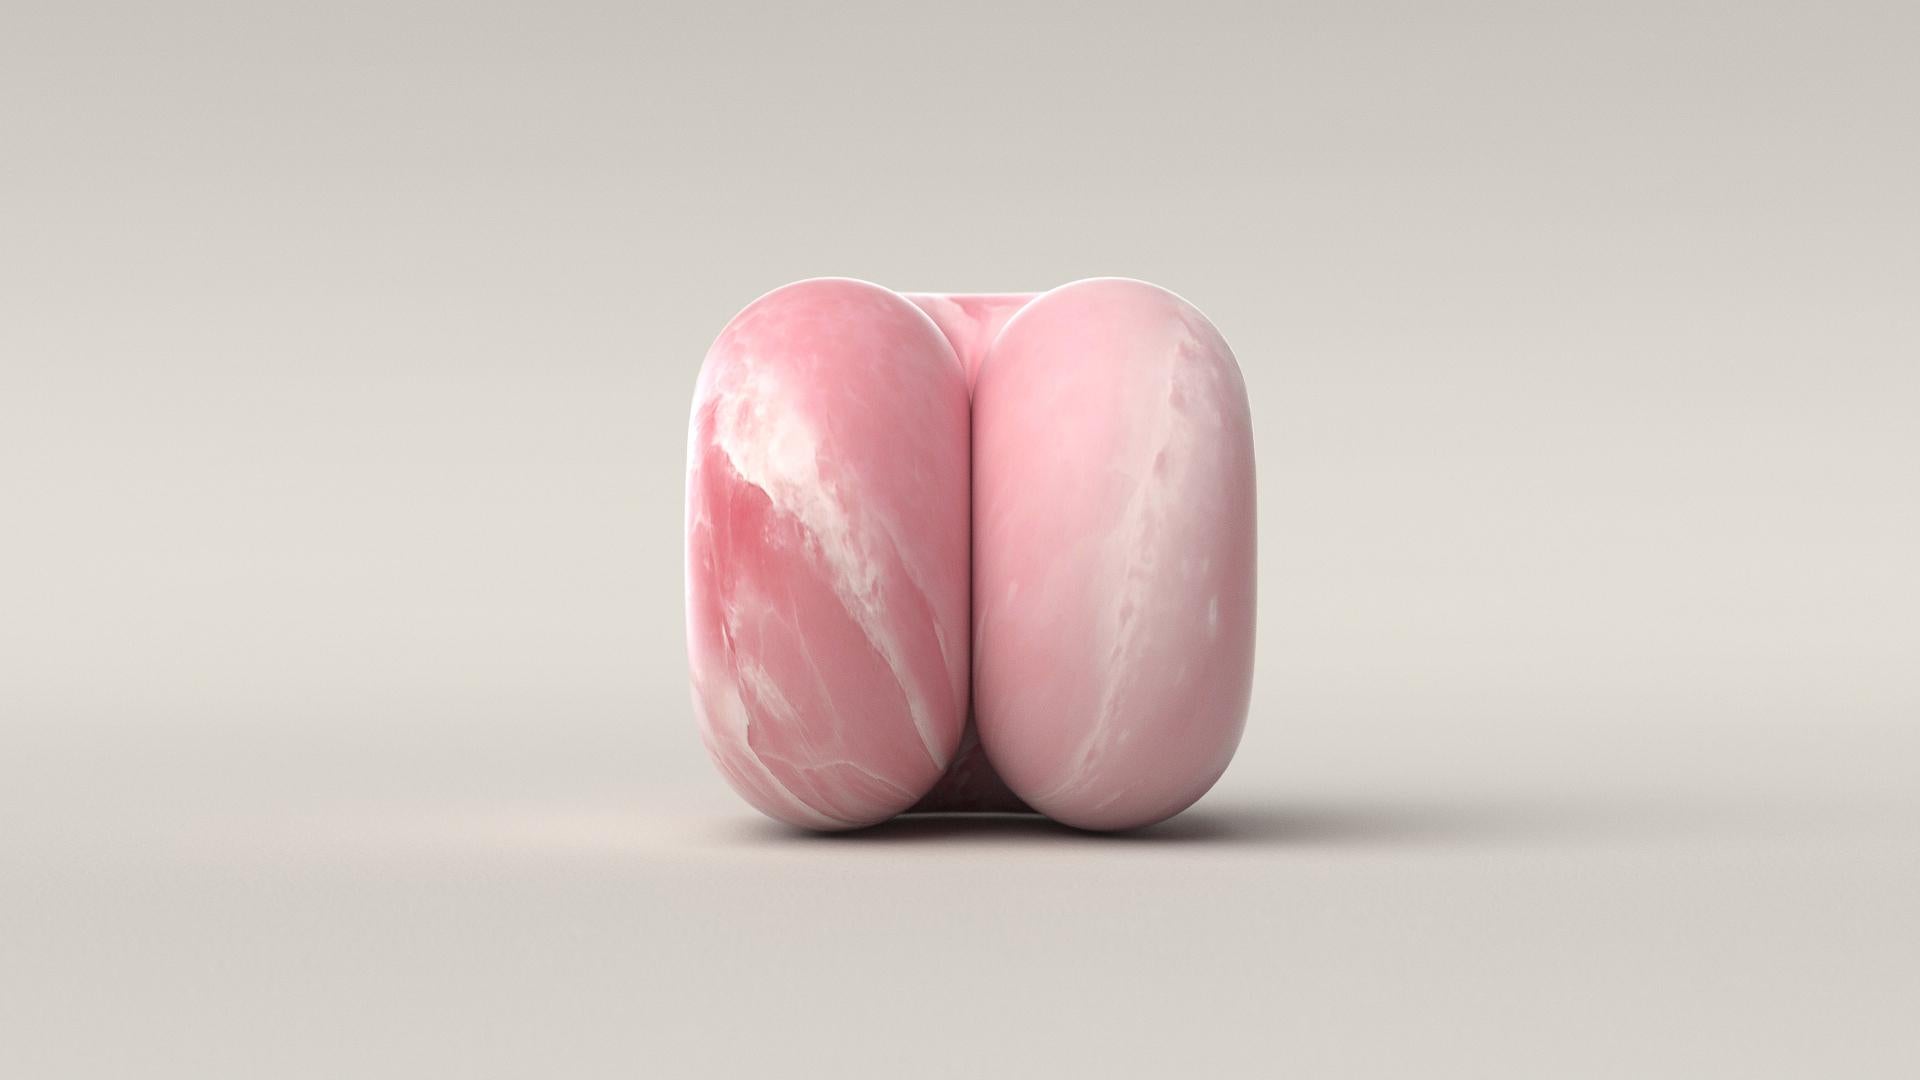 Pink Onyx Octane by Arthur Vallin
Limited Edition
Dimensions: W 55 x D 55 x H 45 cm
Materials: Pink Onyx
Finishing: Matte Un-honed

French Artist, Designer, and Creative Director Arthur Vallin hold a master’s degree in Art Direction from the